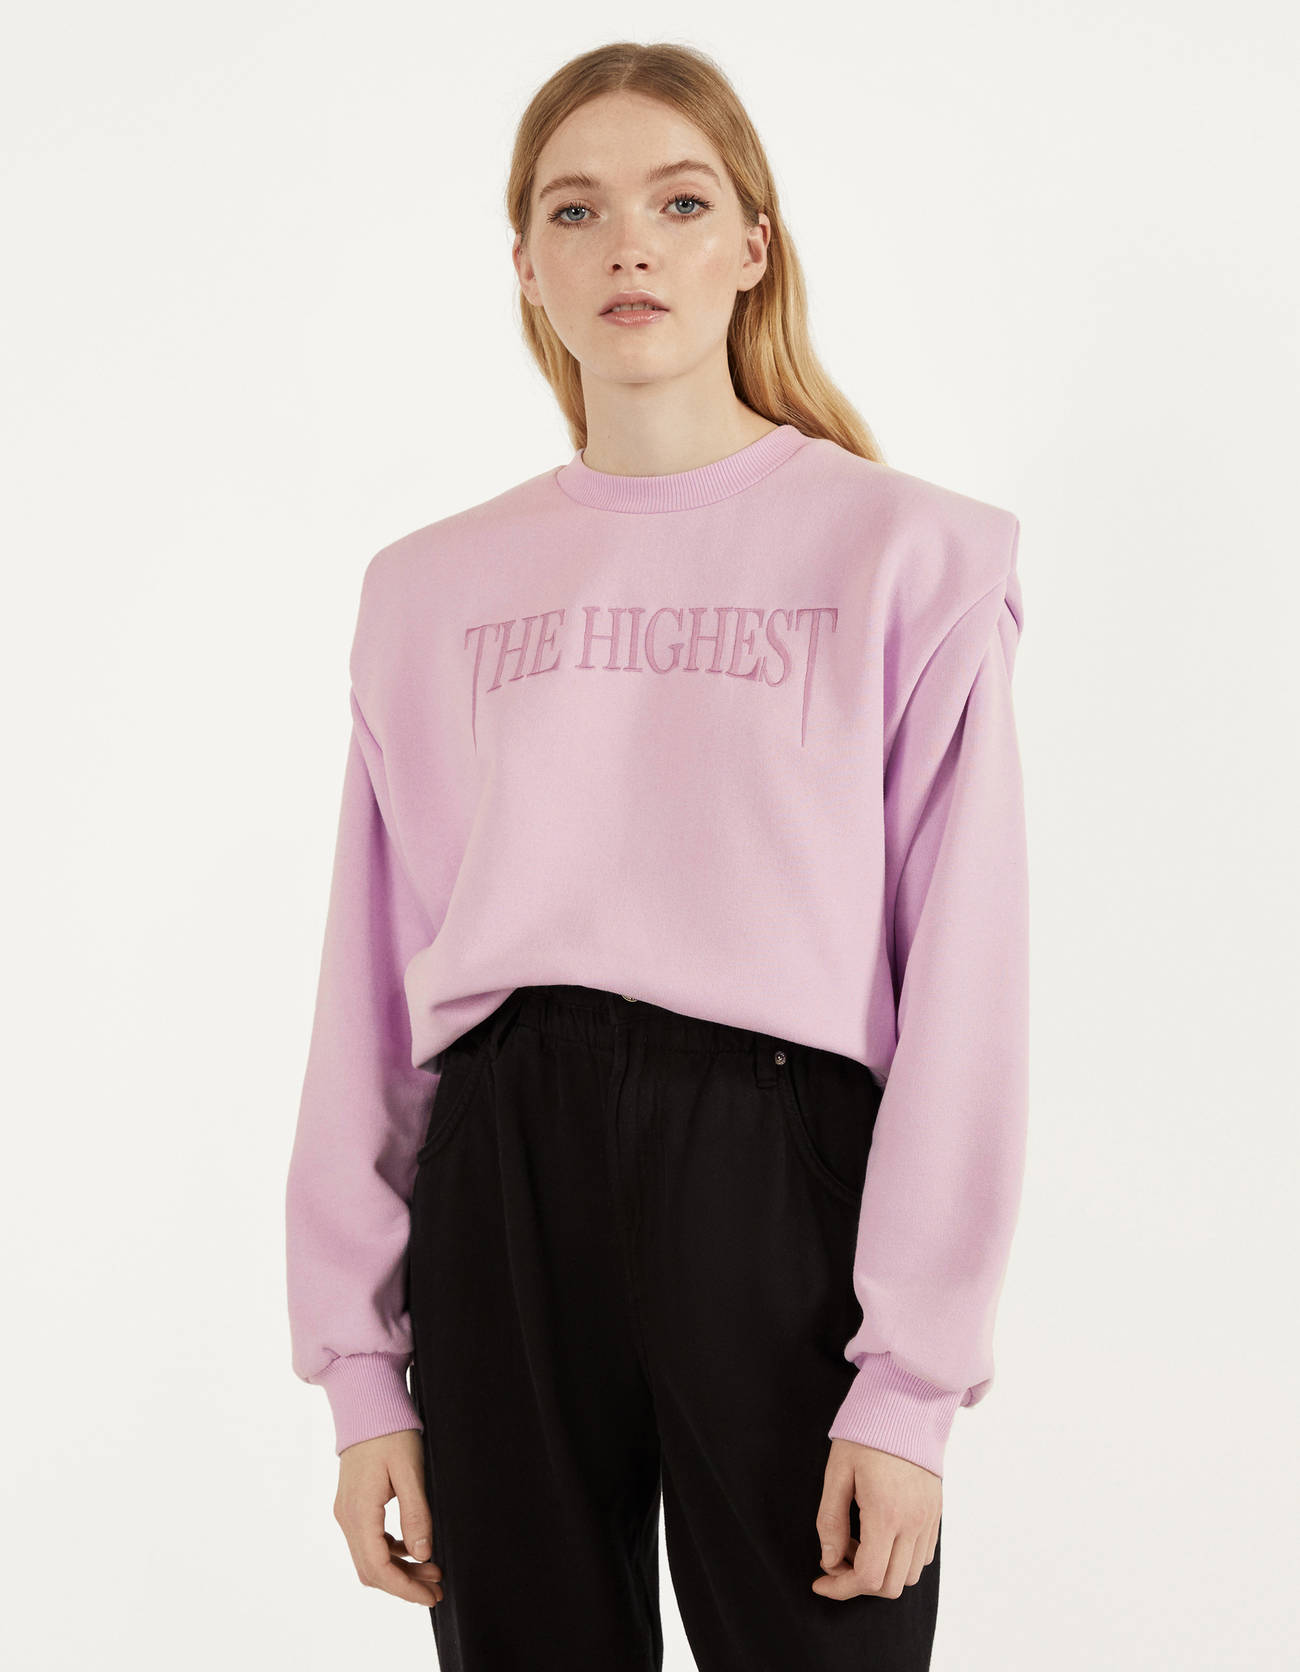 Sweatshirt with shoulder pads and embroidery.